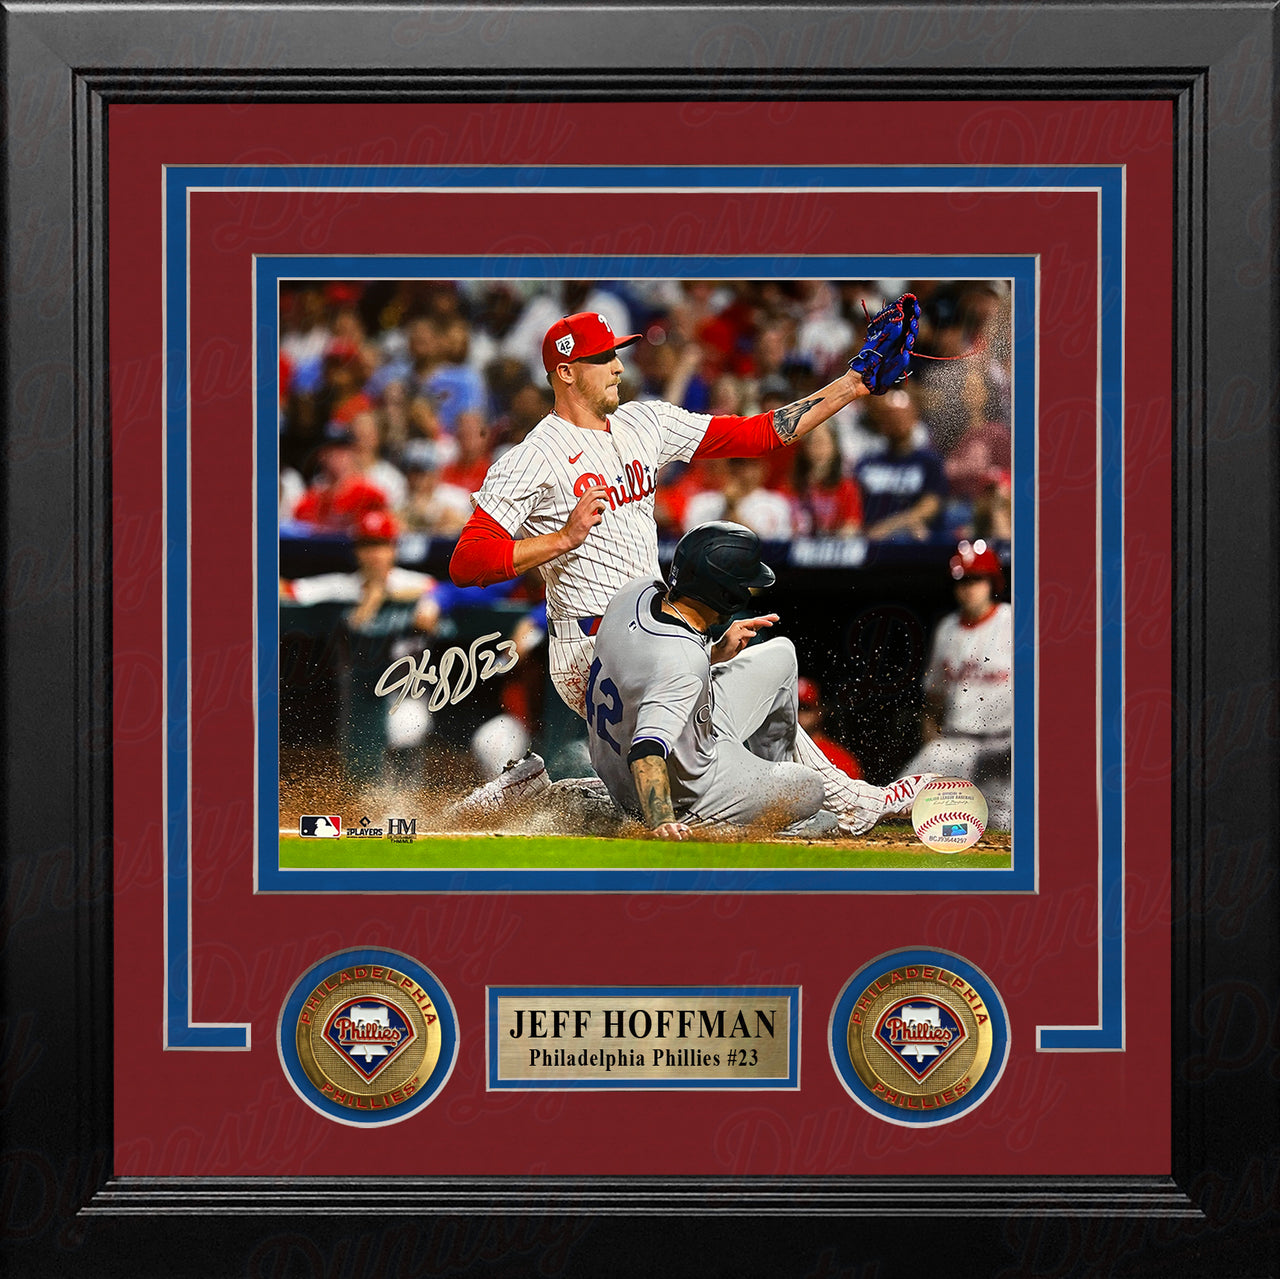 Jeff Hoffman Play at the Plate Philadelphia Phillies Autographed 8" x 10" Framed Baseball Photo